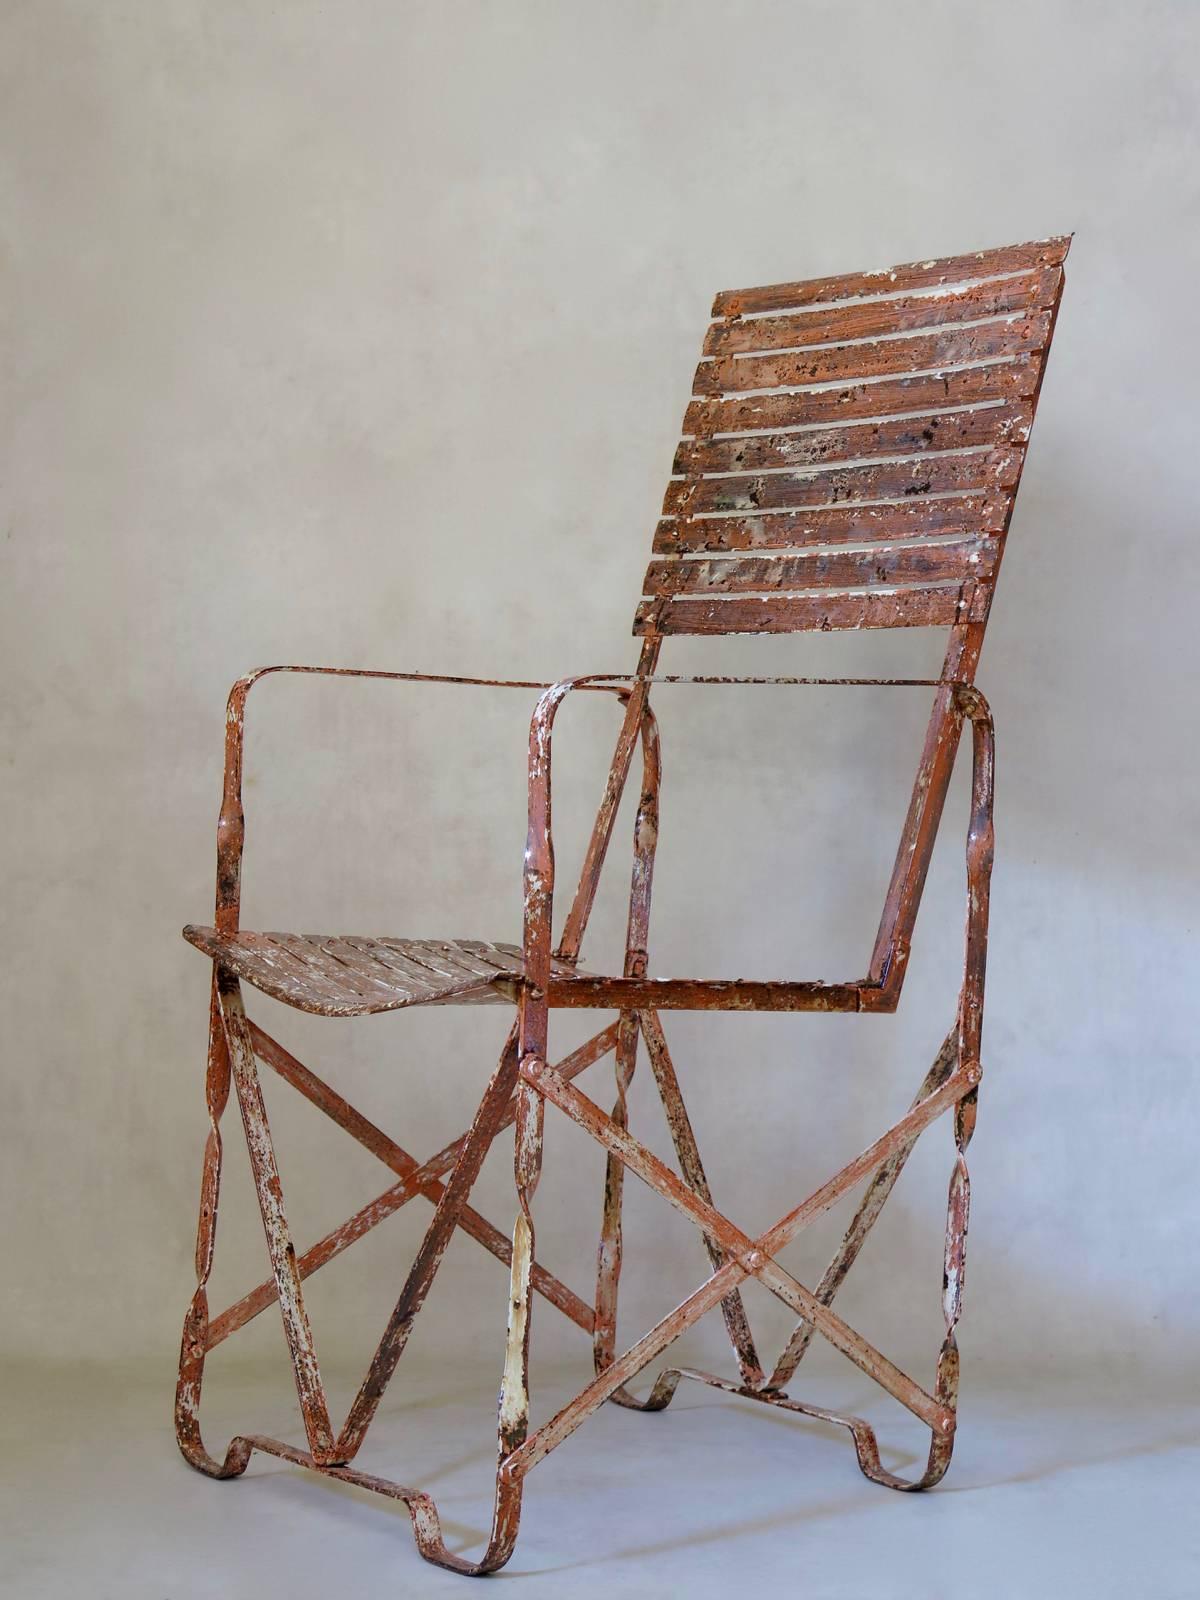 Unusual almost-pair of Industrial armchairs, entirely made from assembled parts that have been screwed and bolted together, much like Meccano. The bases are slightly different. Traces of the original white here and there, but mostly visible is the